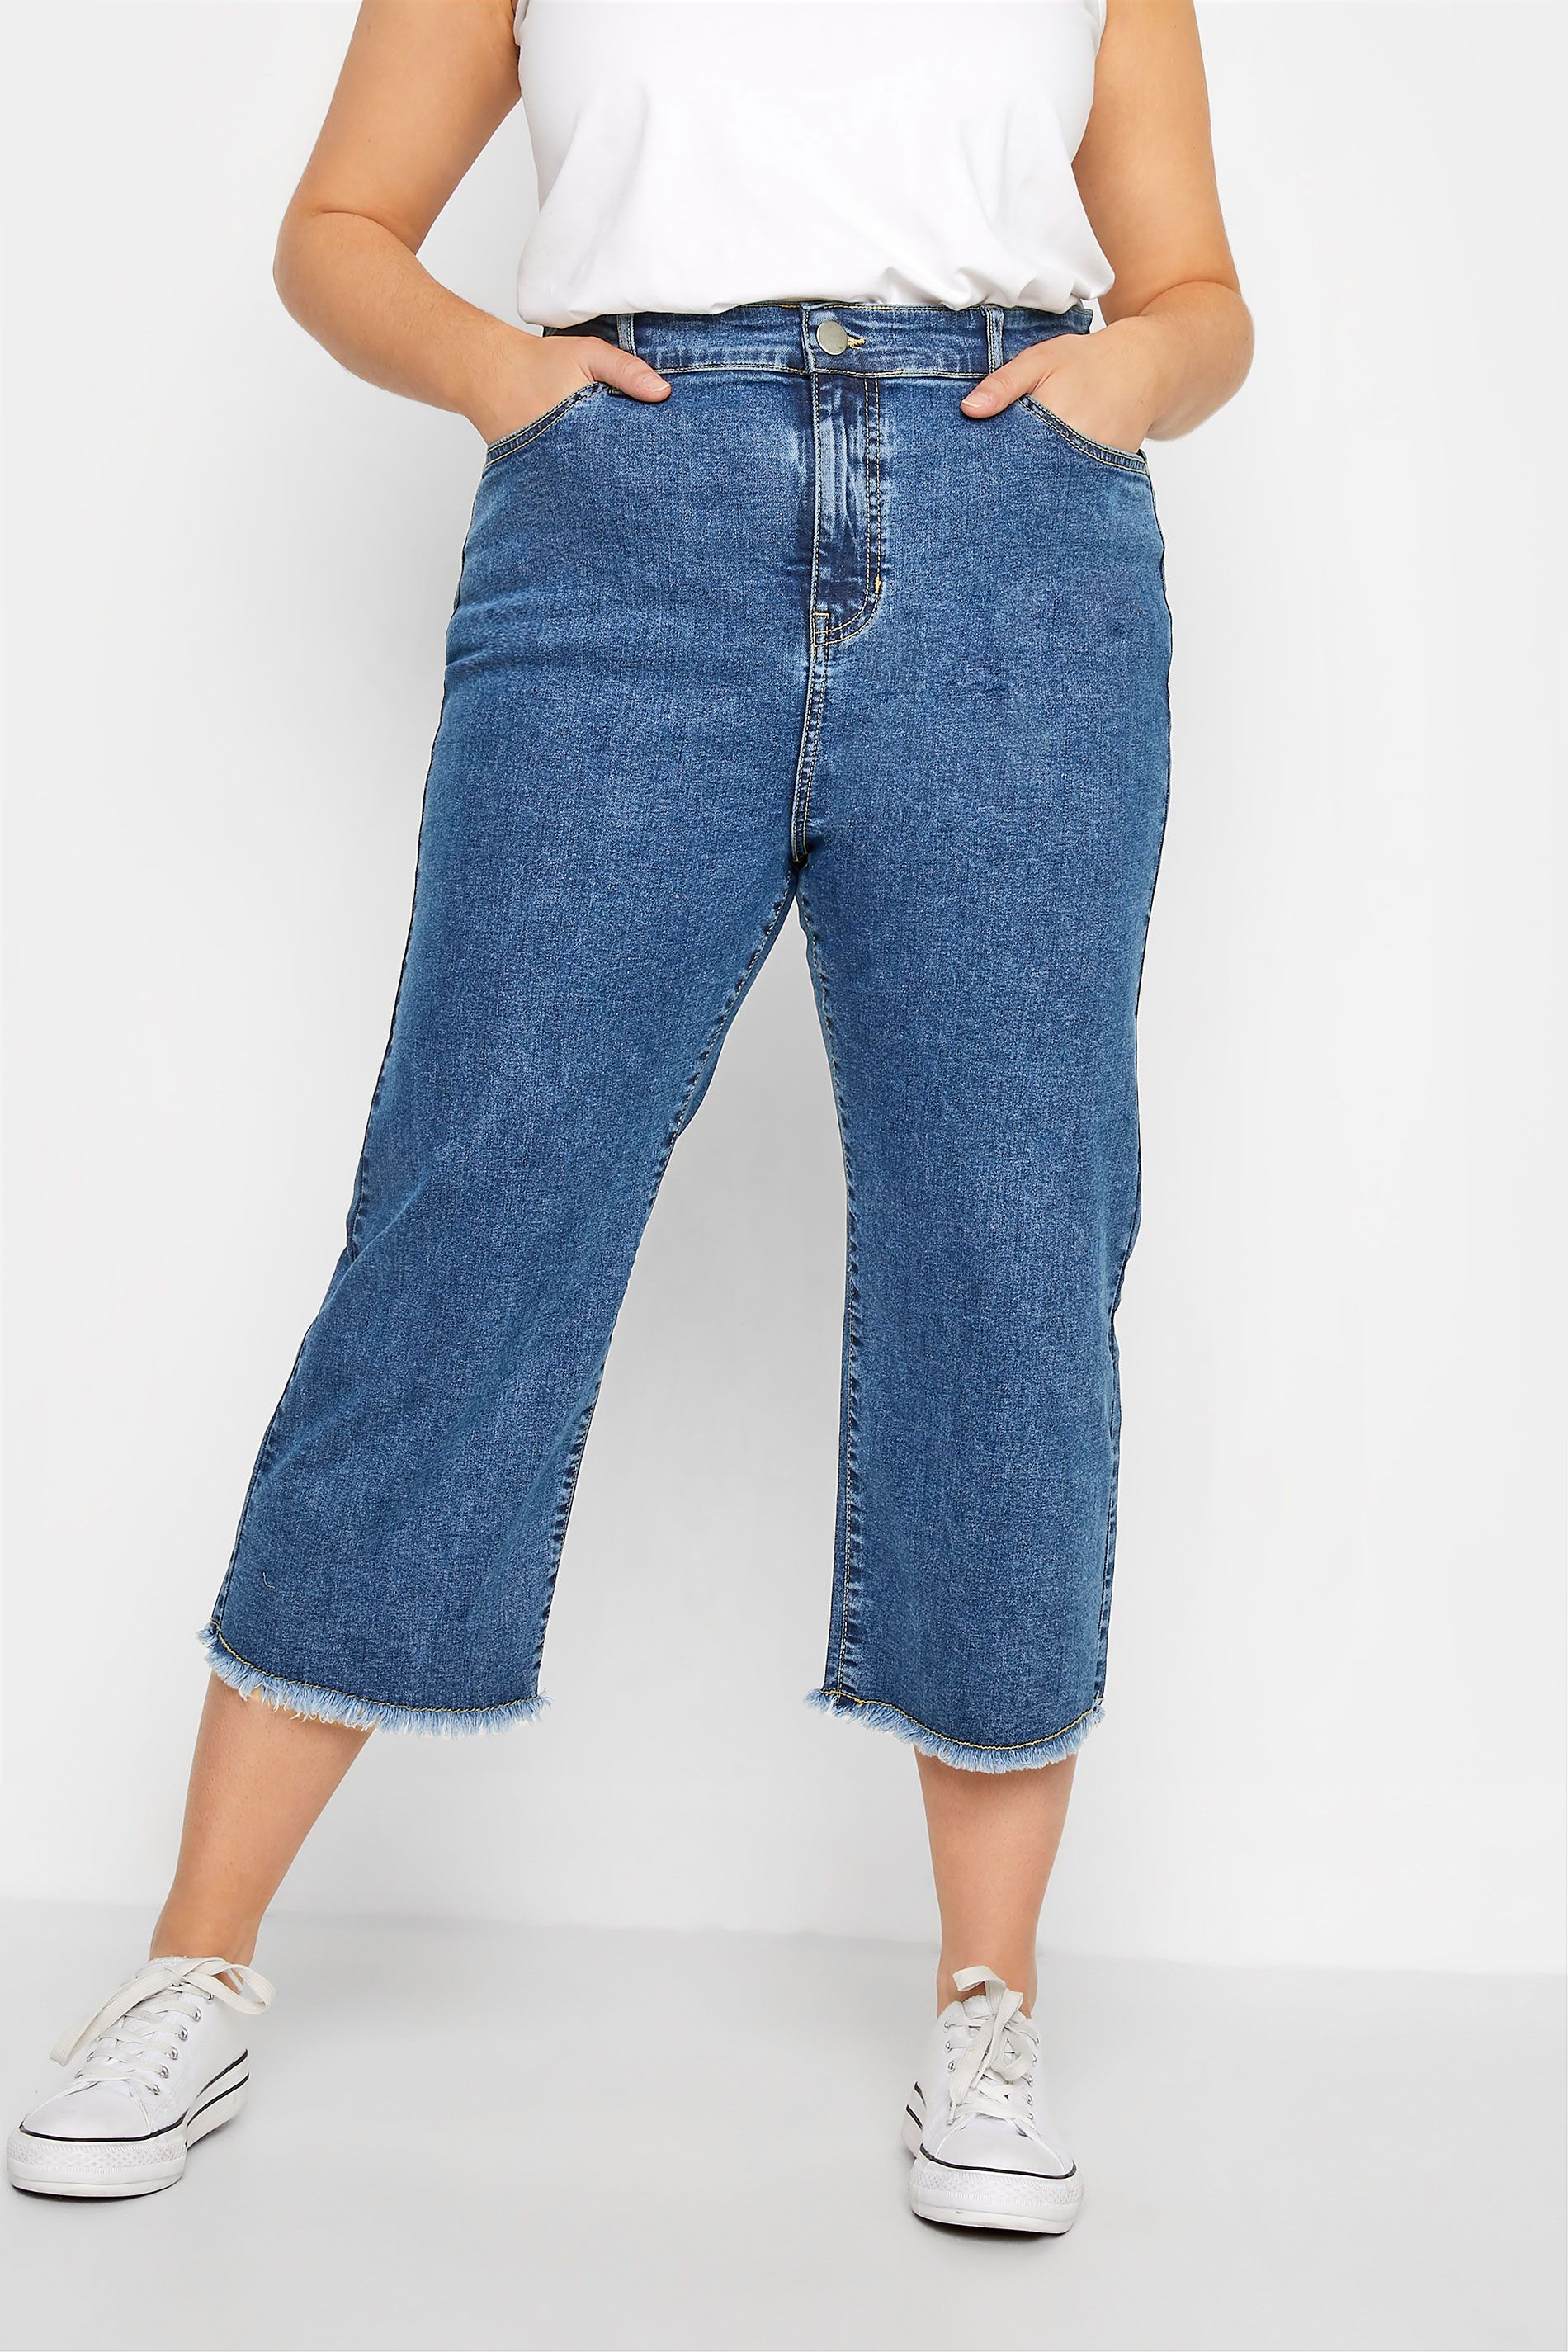 Pantacourts Grande Taille Grande taille  Pantacourts en jean | Pantacourt en Jean Bleu Ourlets Effilochés - DK58952